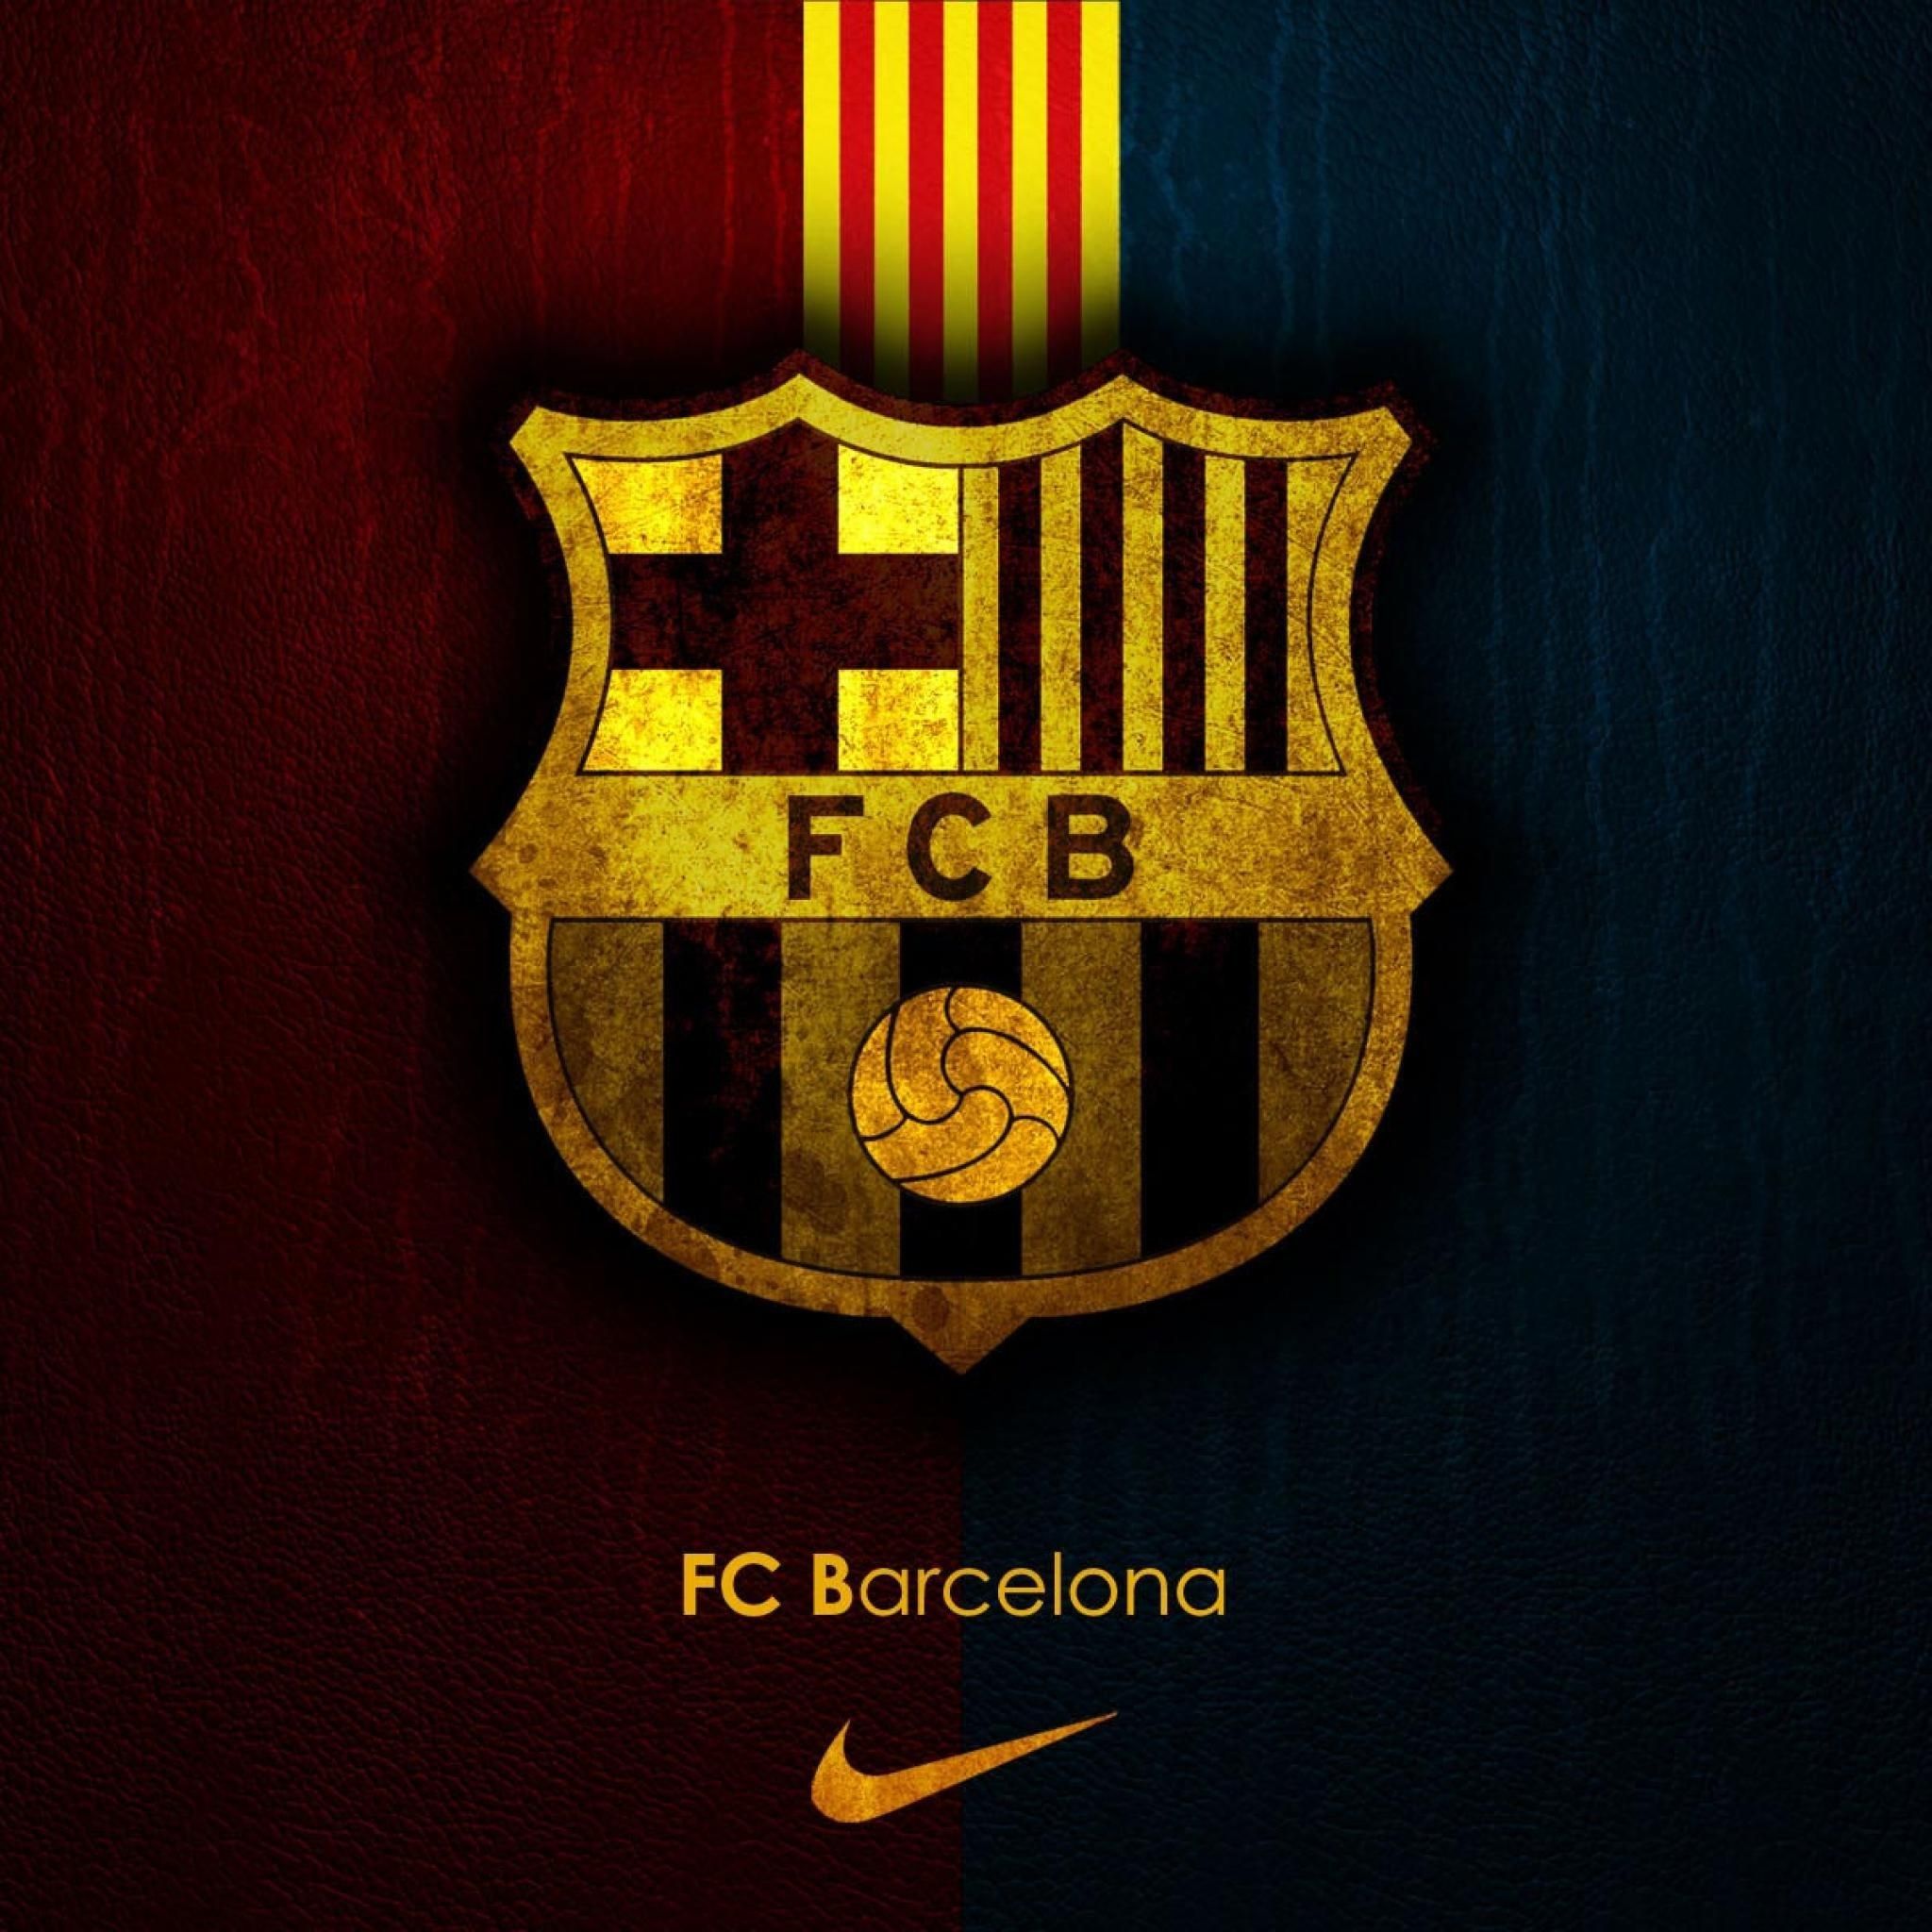 Messi Logo Wallpaper background picture